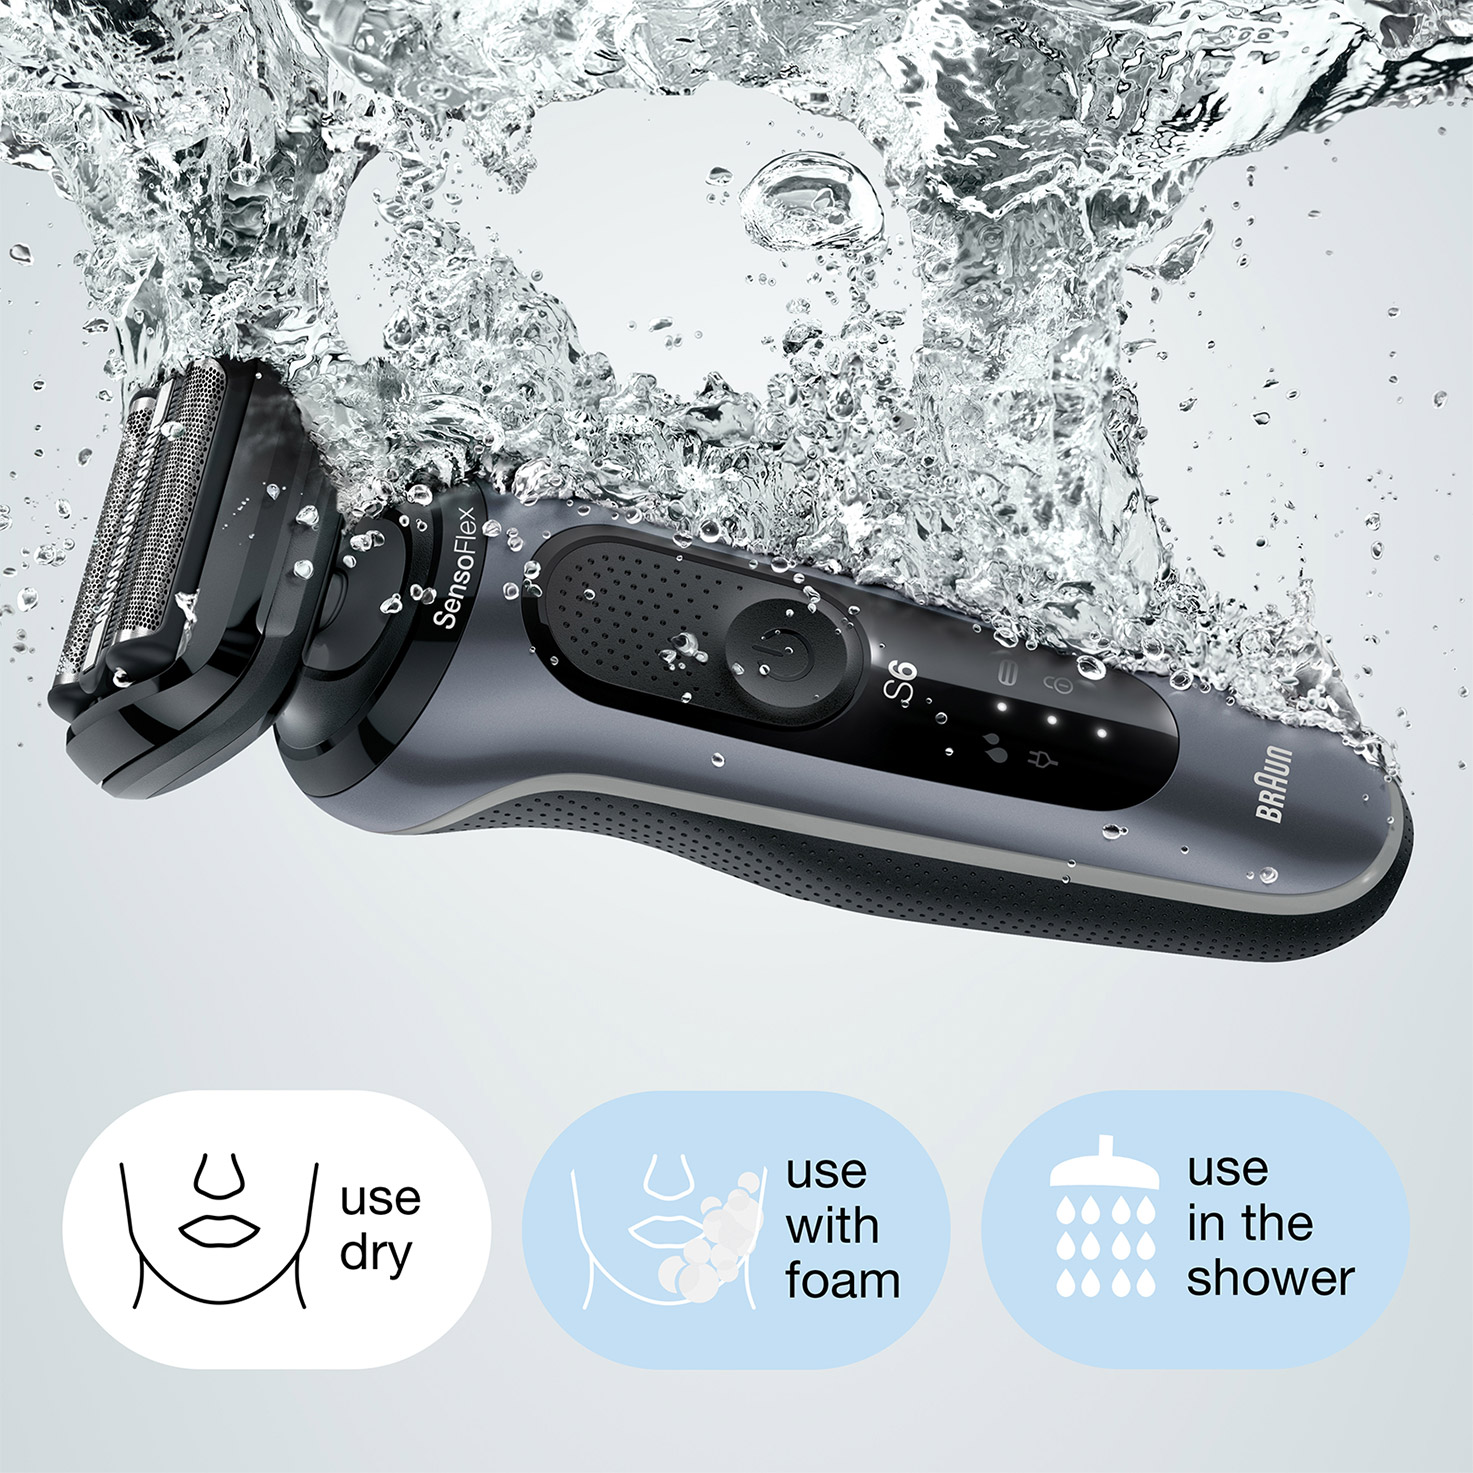 Series 6 61-N4500cs Wet Braun shaver & 1 | Dry attachment, SG and charging with stand grey